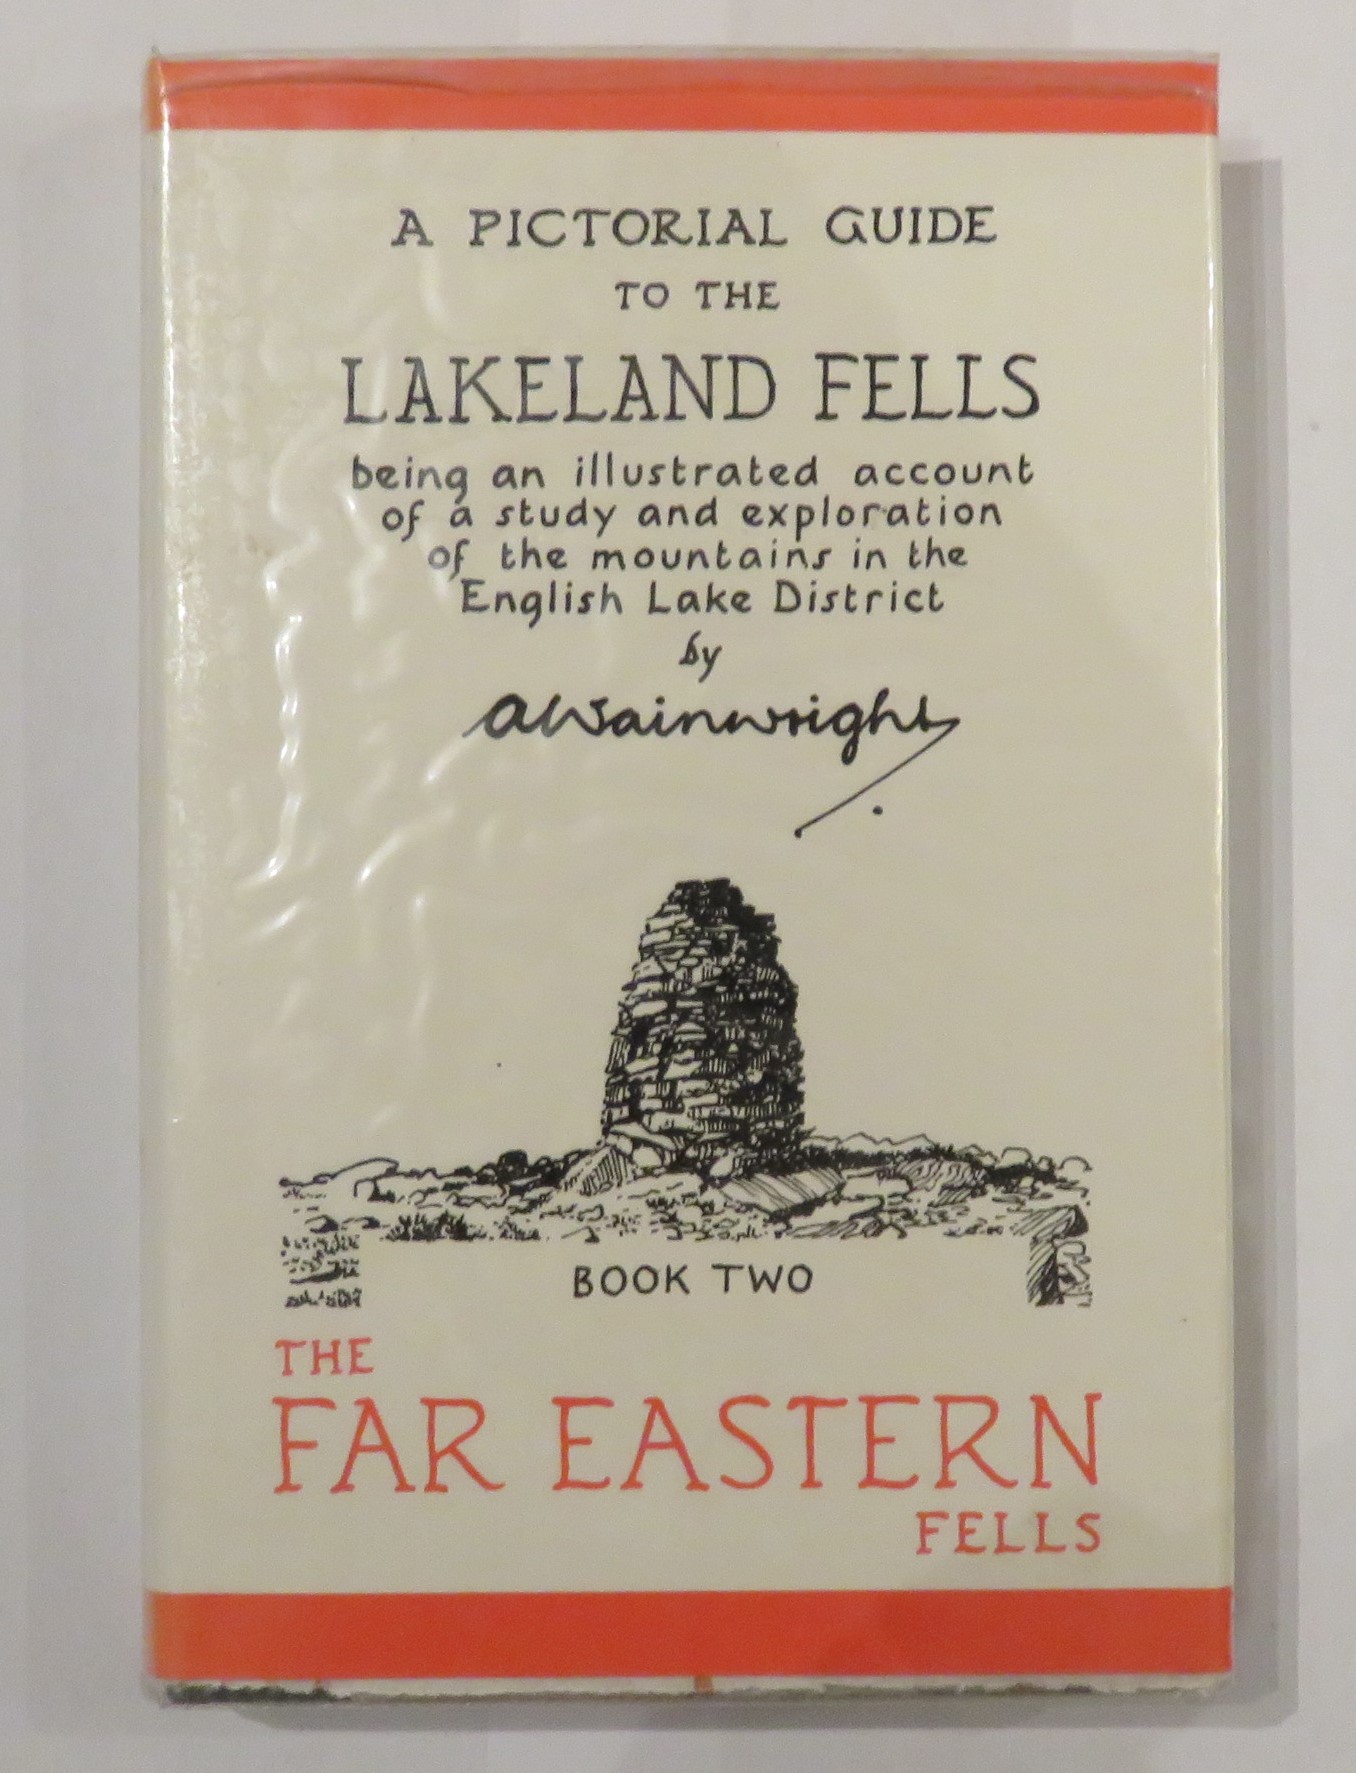 A Pictorial Guide to the Lakeland Fells, Book Two: The Far Eastern Fells